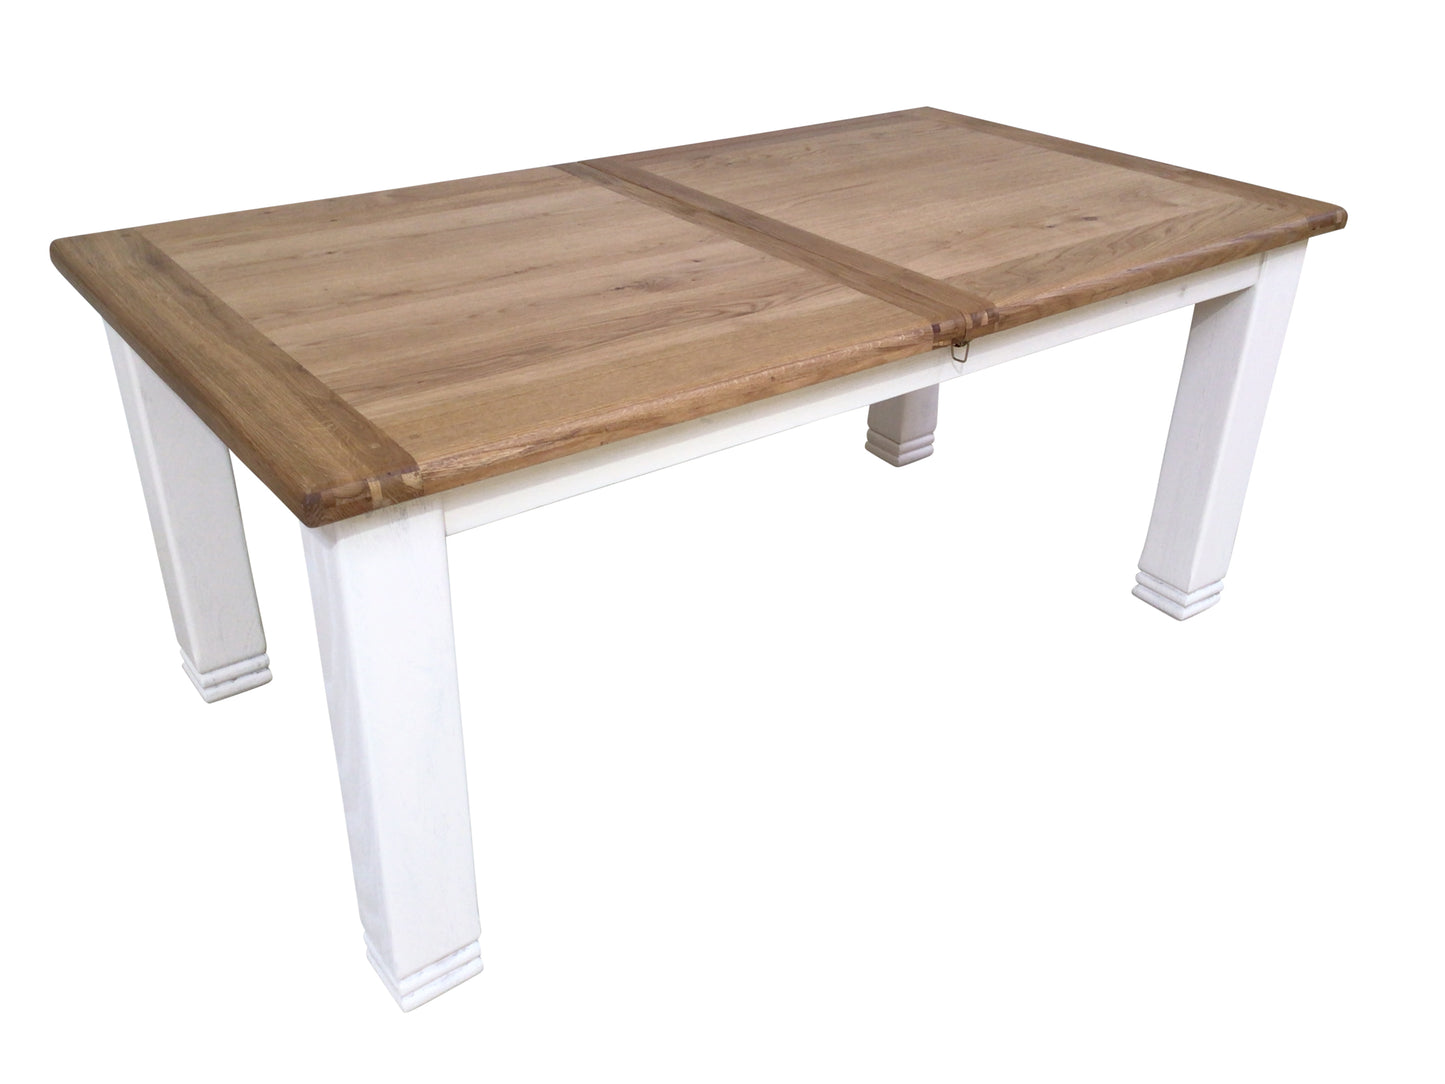 Danube Oak 1.8m Extension Dining Set painted white